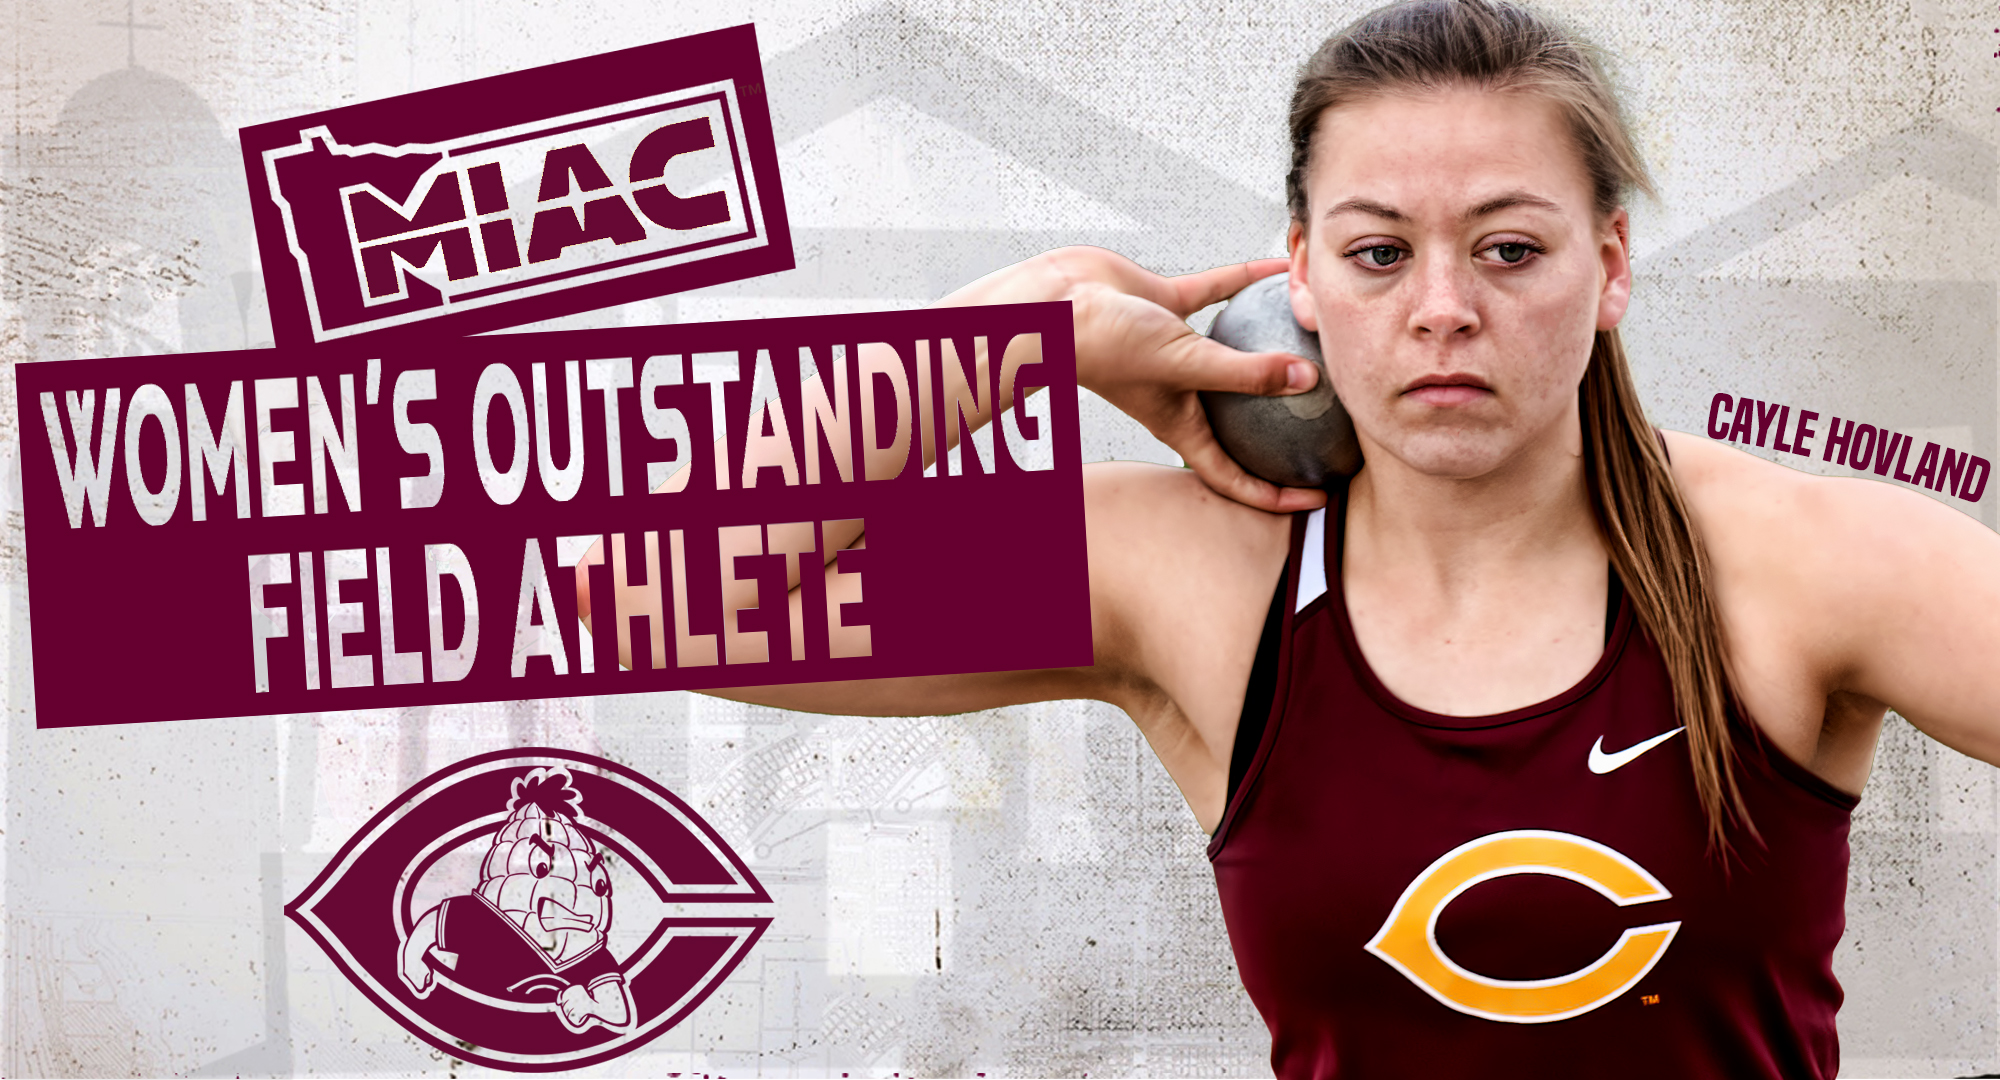 Cayle Hovland was named the MIAC Women’s Outstanding Field Athlete for her performance in all three throwing events at last weekend’s conference championship meet.